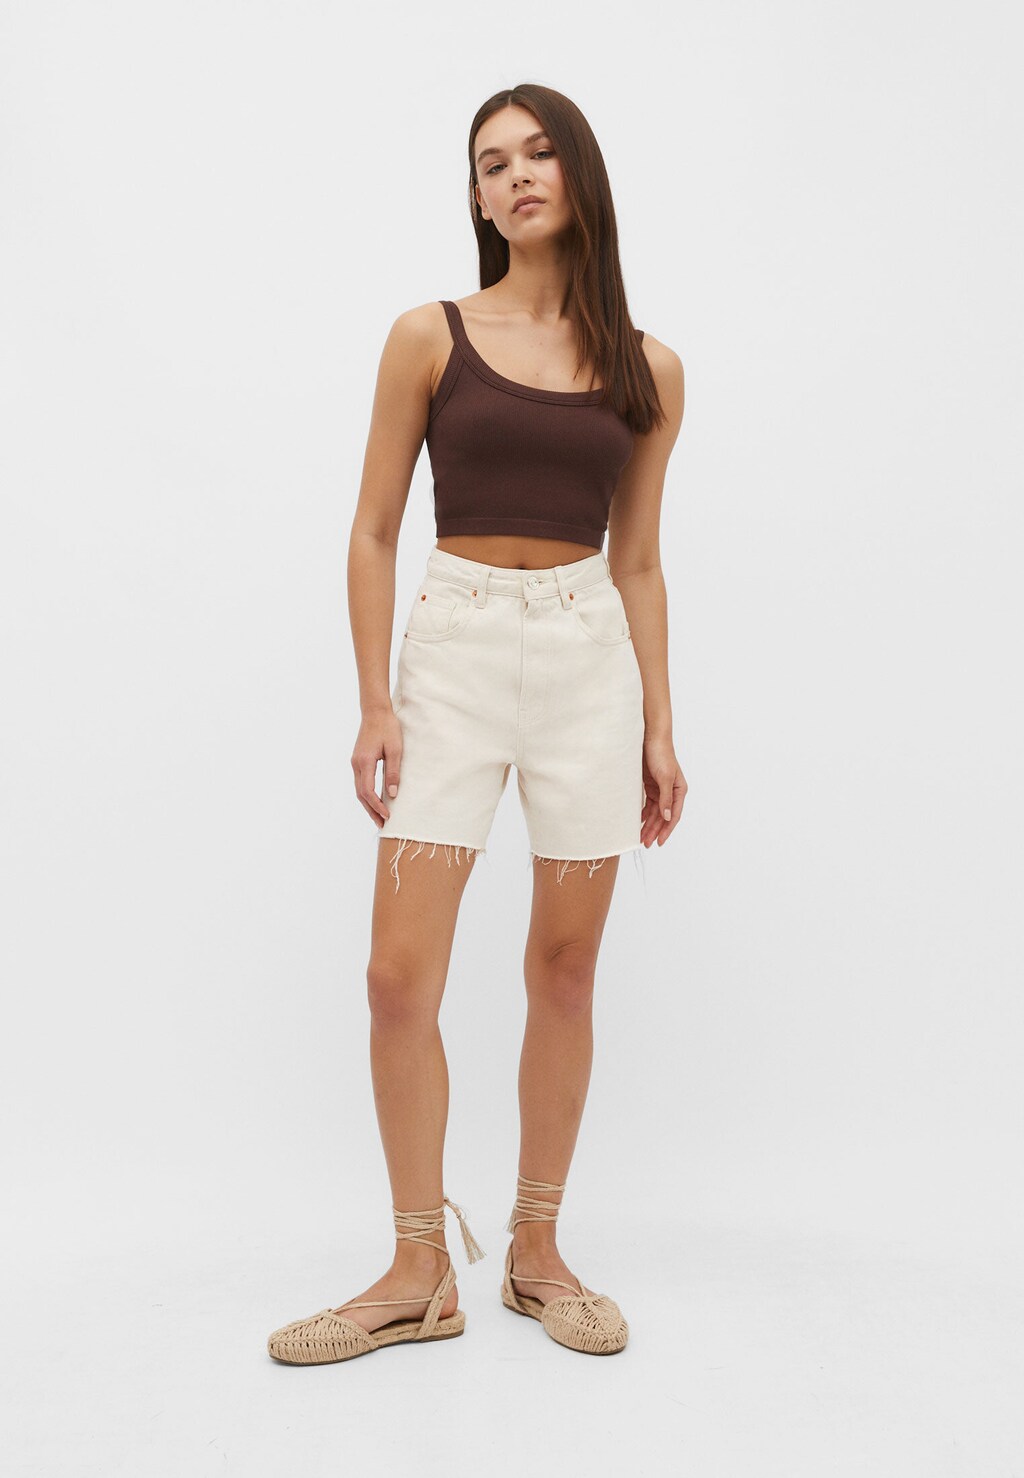 Crop top camisole with straps - Women's fashion